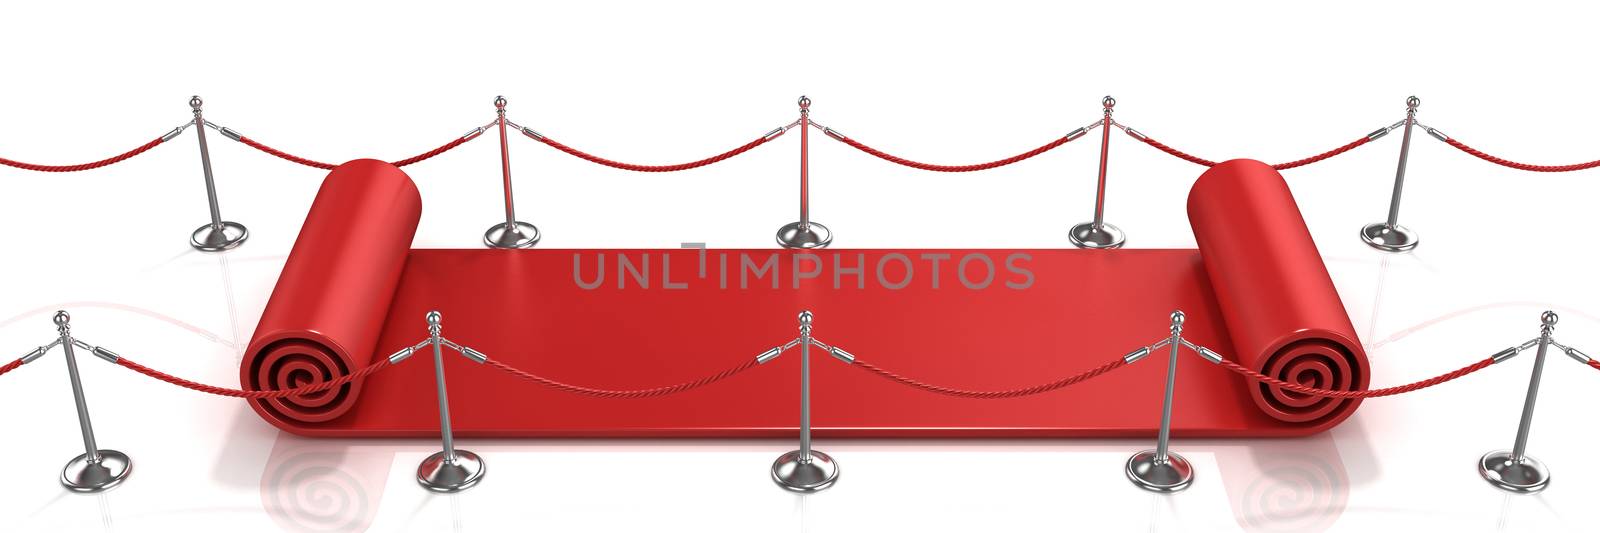 Red carpet unrolling concept by djmilic